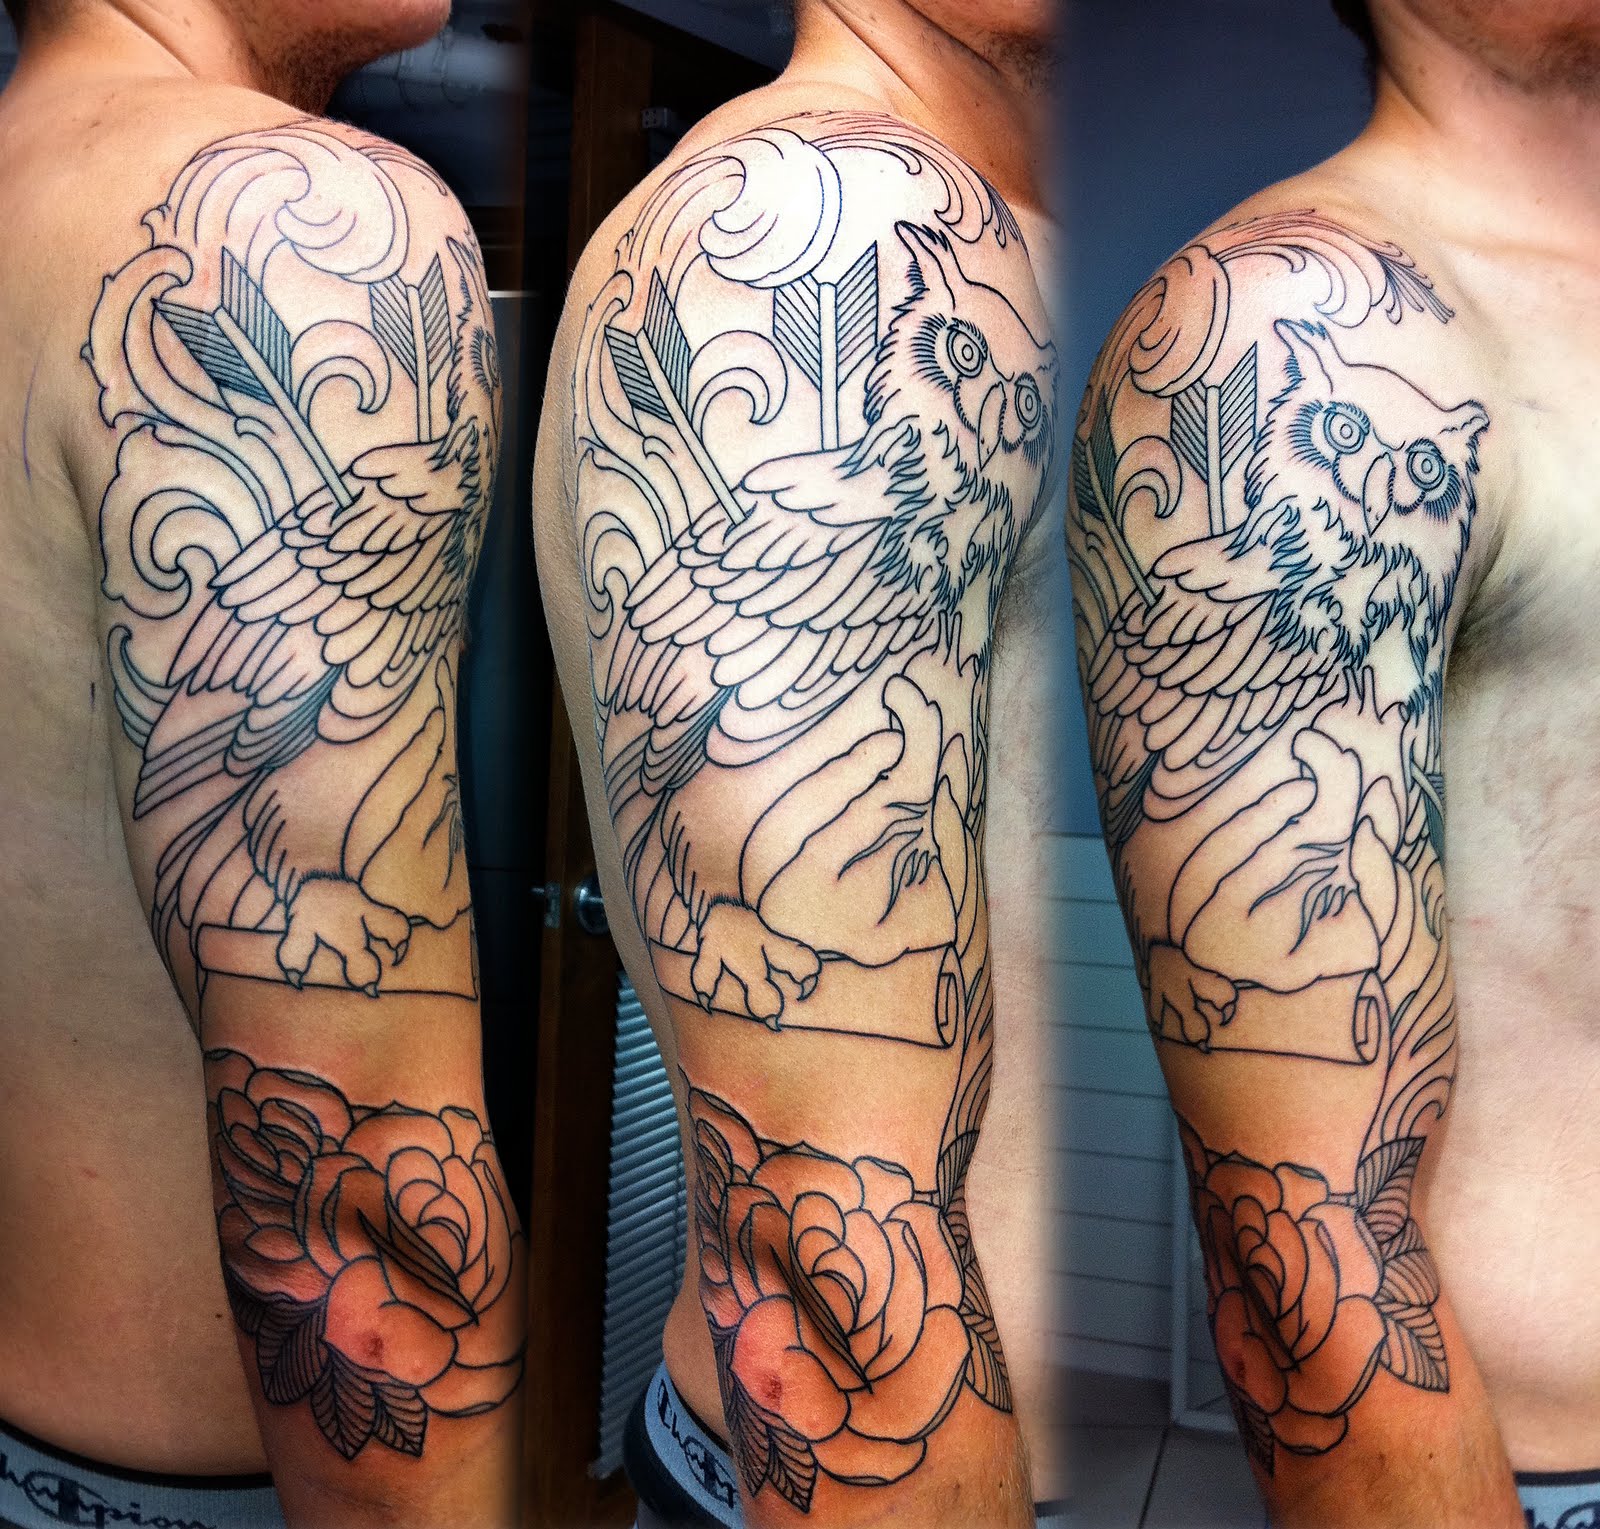 Mexican Tattoo Sleeves Couple half sleeves i started